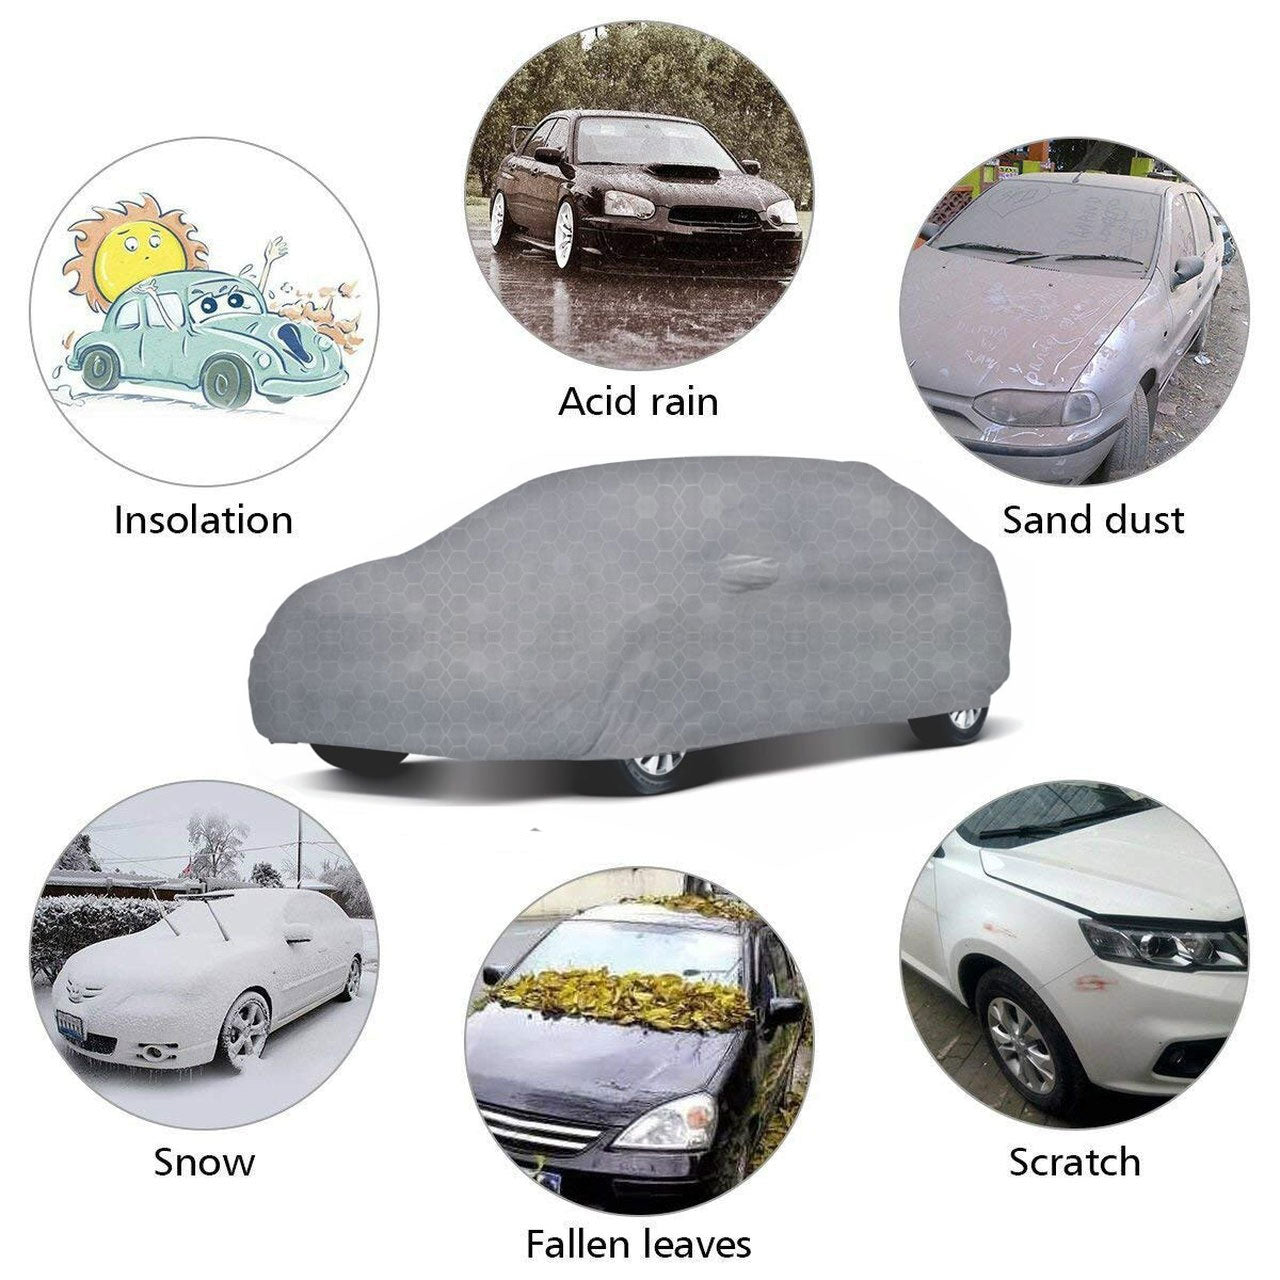 Oshotto 100% Dust Proof, Water Resistant Grey Car Body Cover with Mirror Pocket For Volvo S80